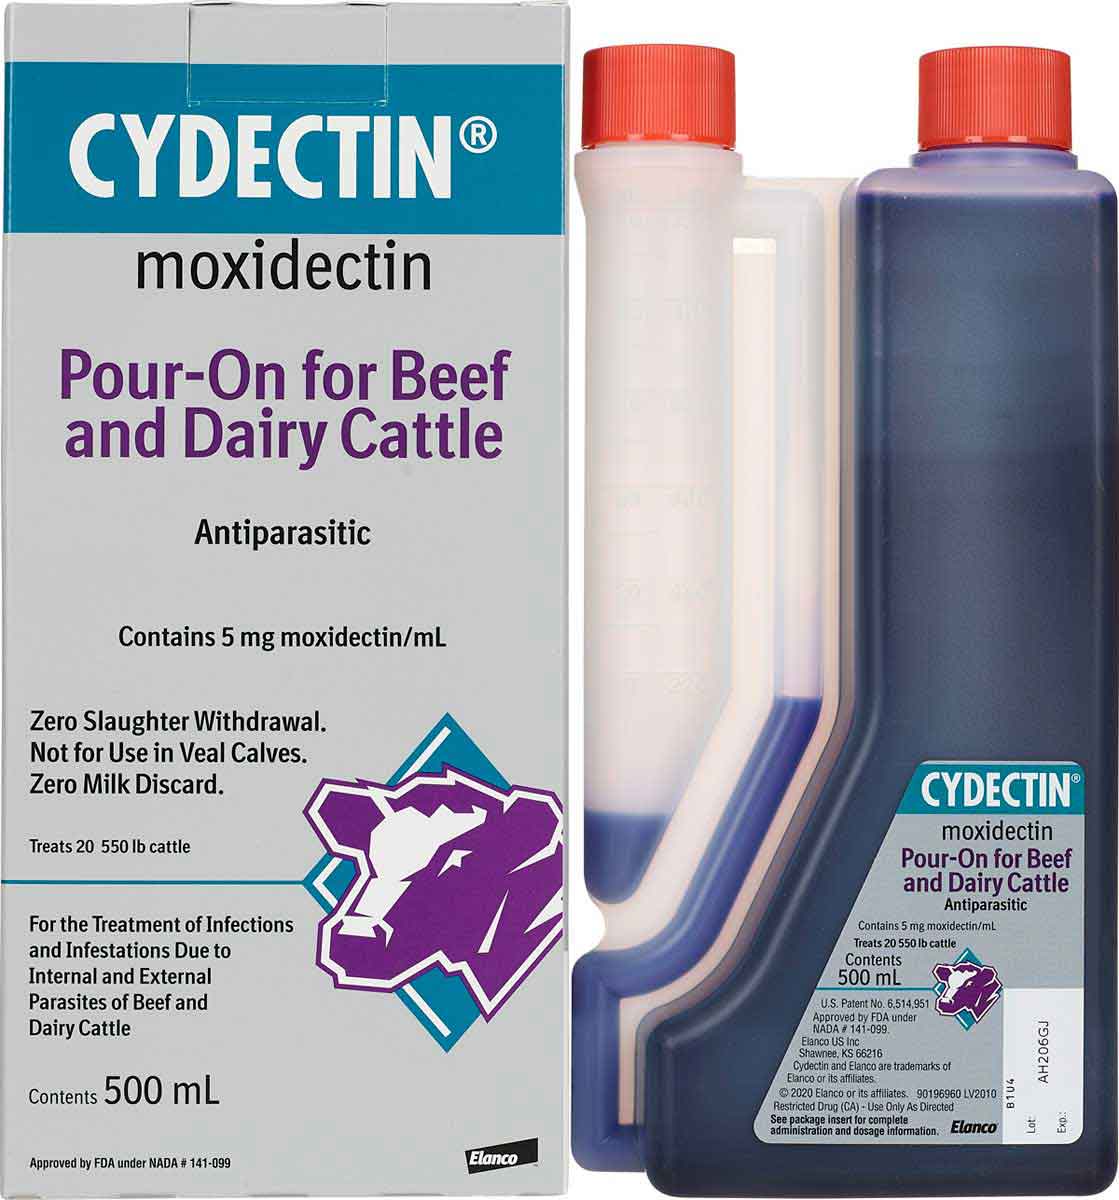 cydectin-pour-on-for-beef-dairy-cattle-bayer-pour-on-ivermectins